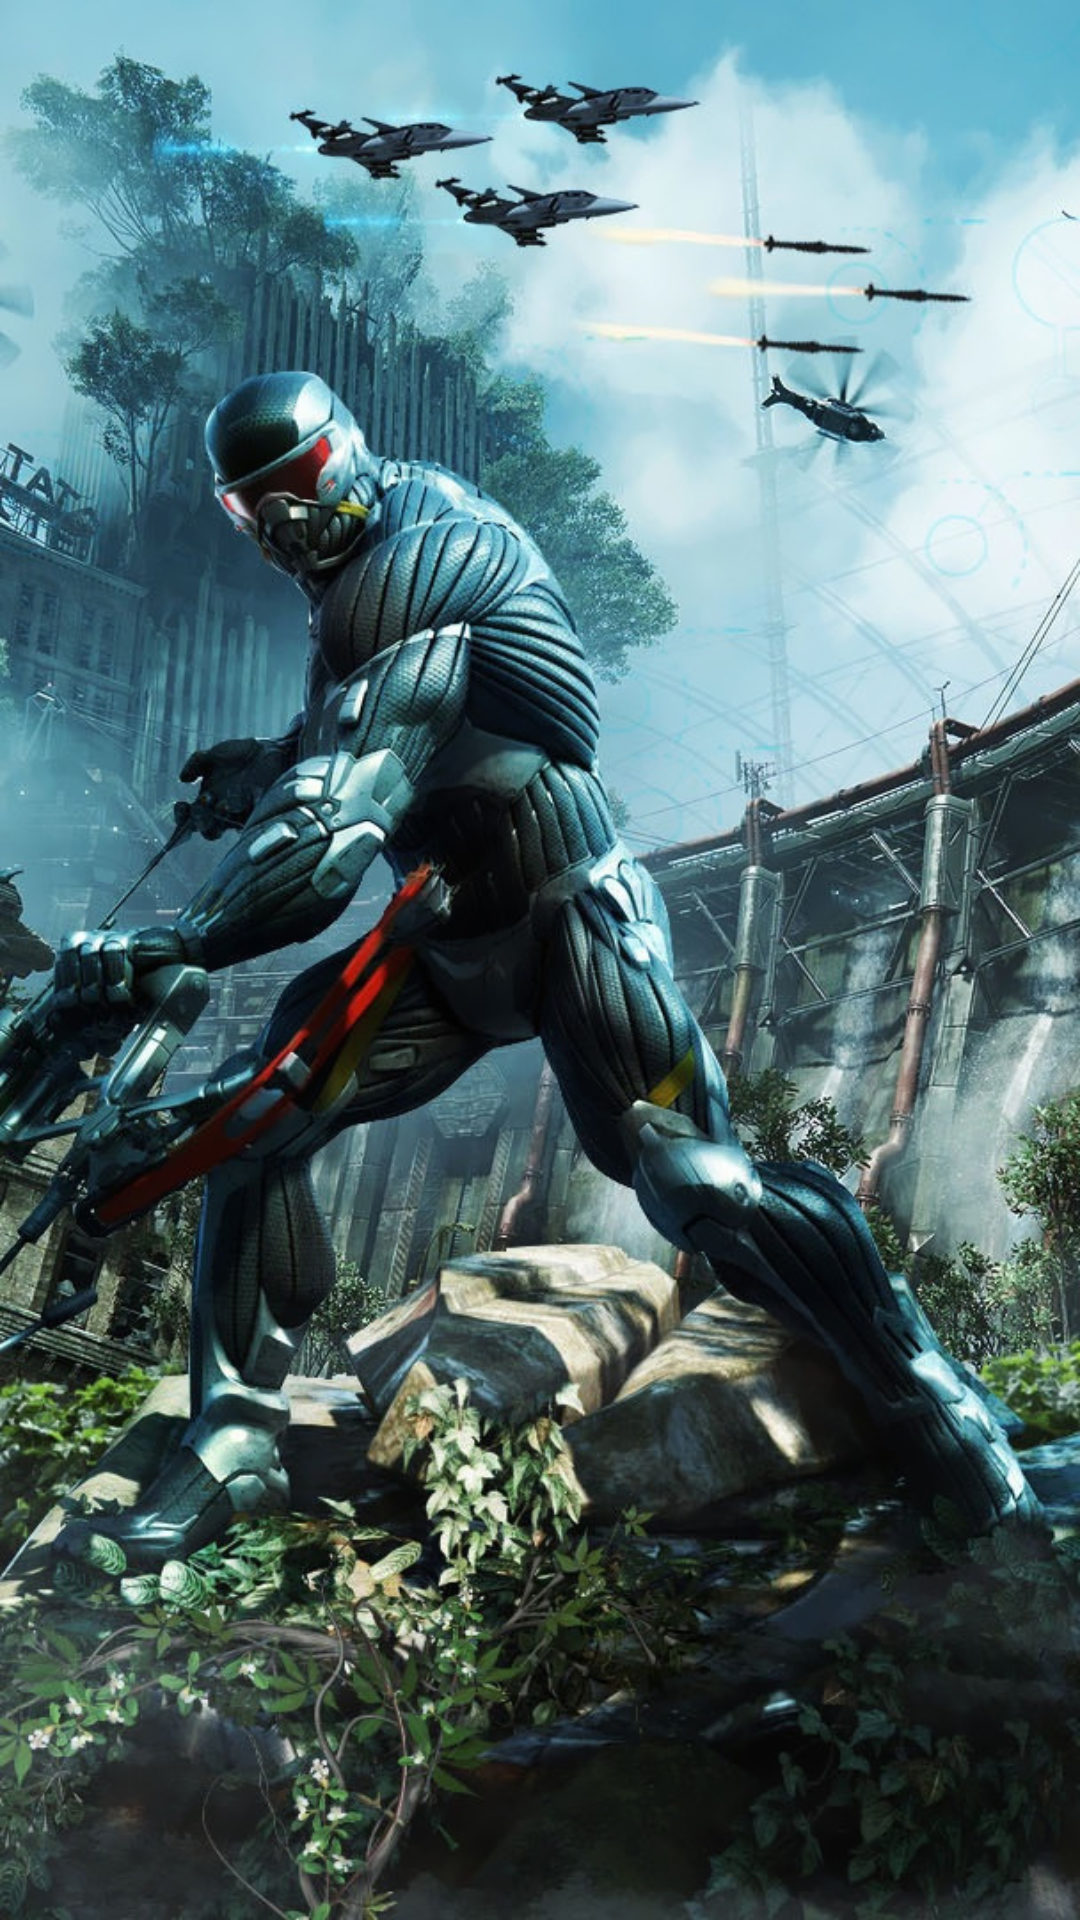 crysis hd wallpapers,action adventure game,pc game,fictional character,movie,cg artwork